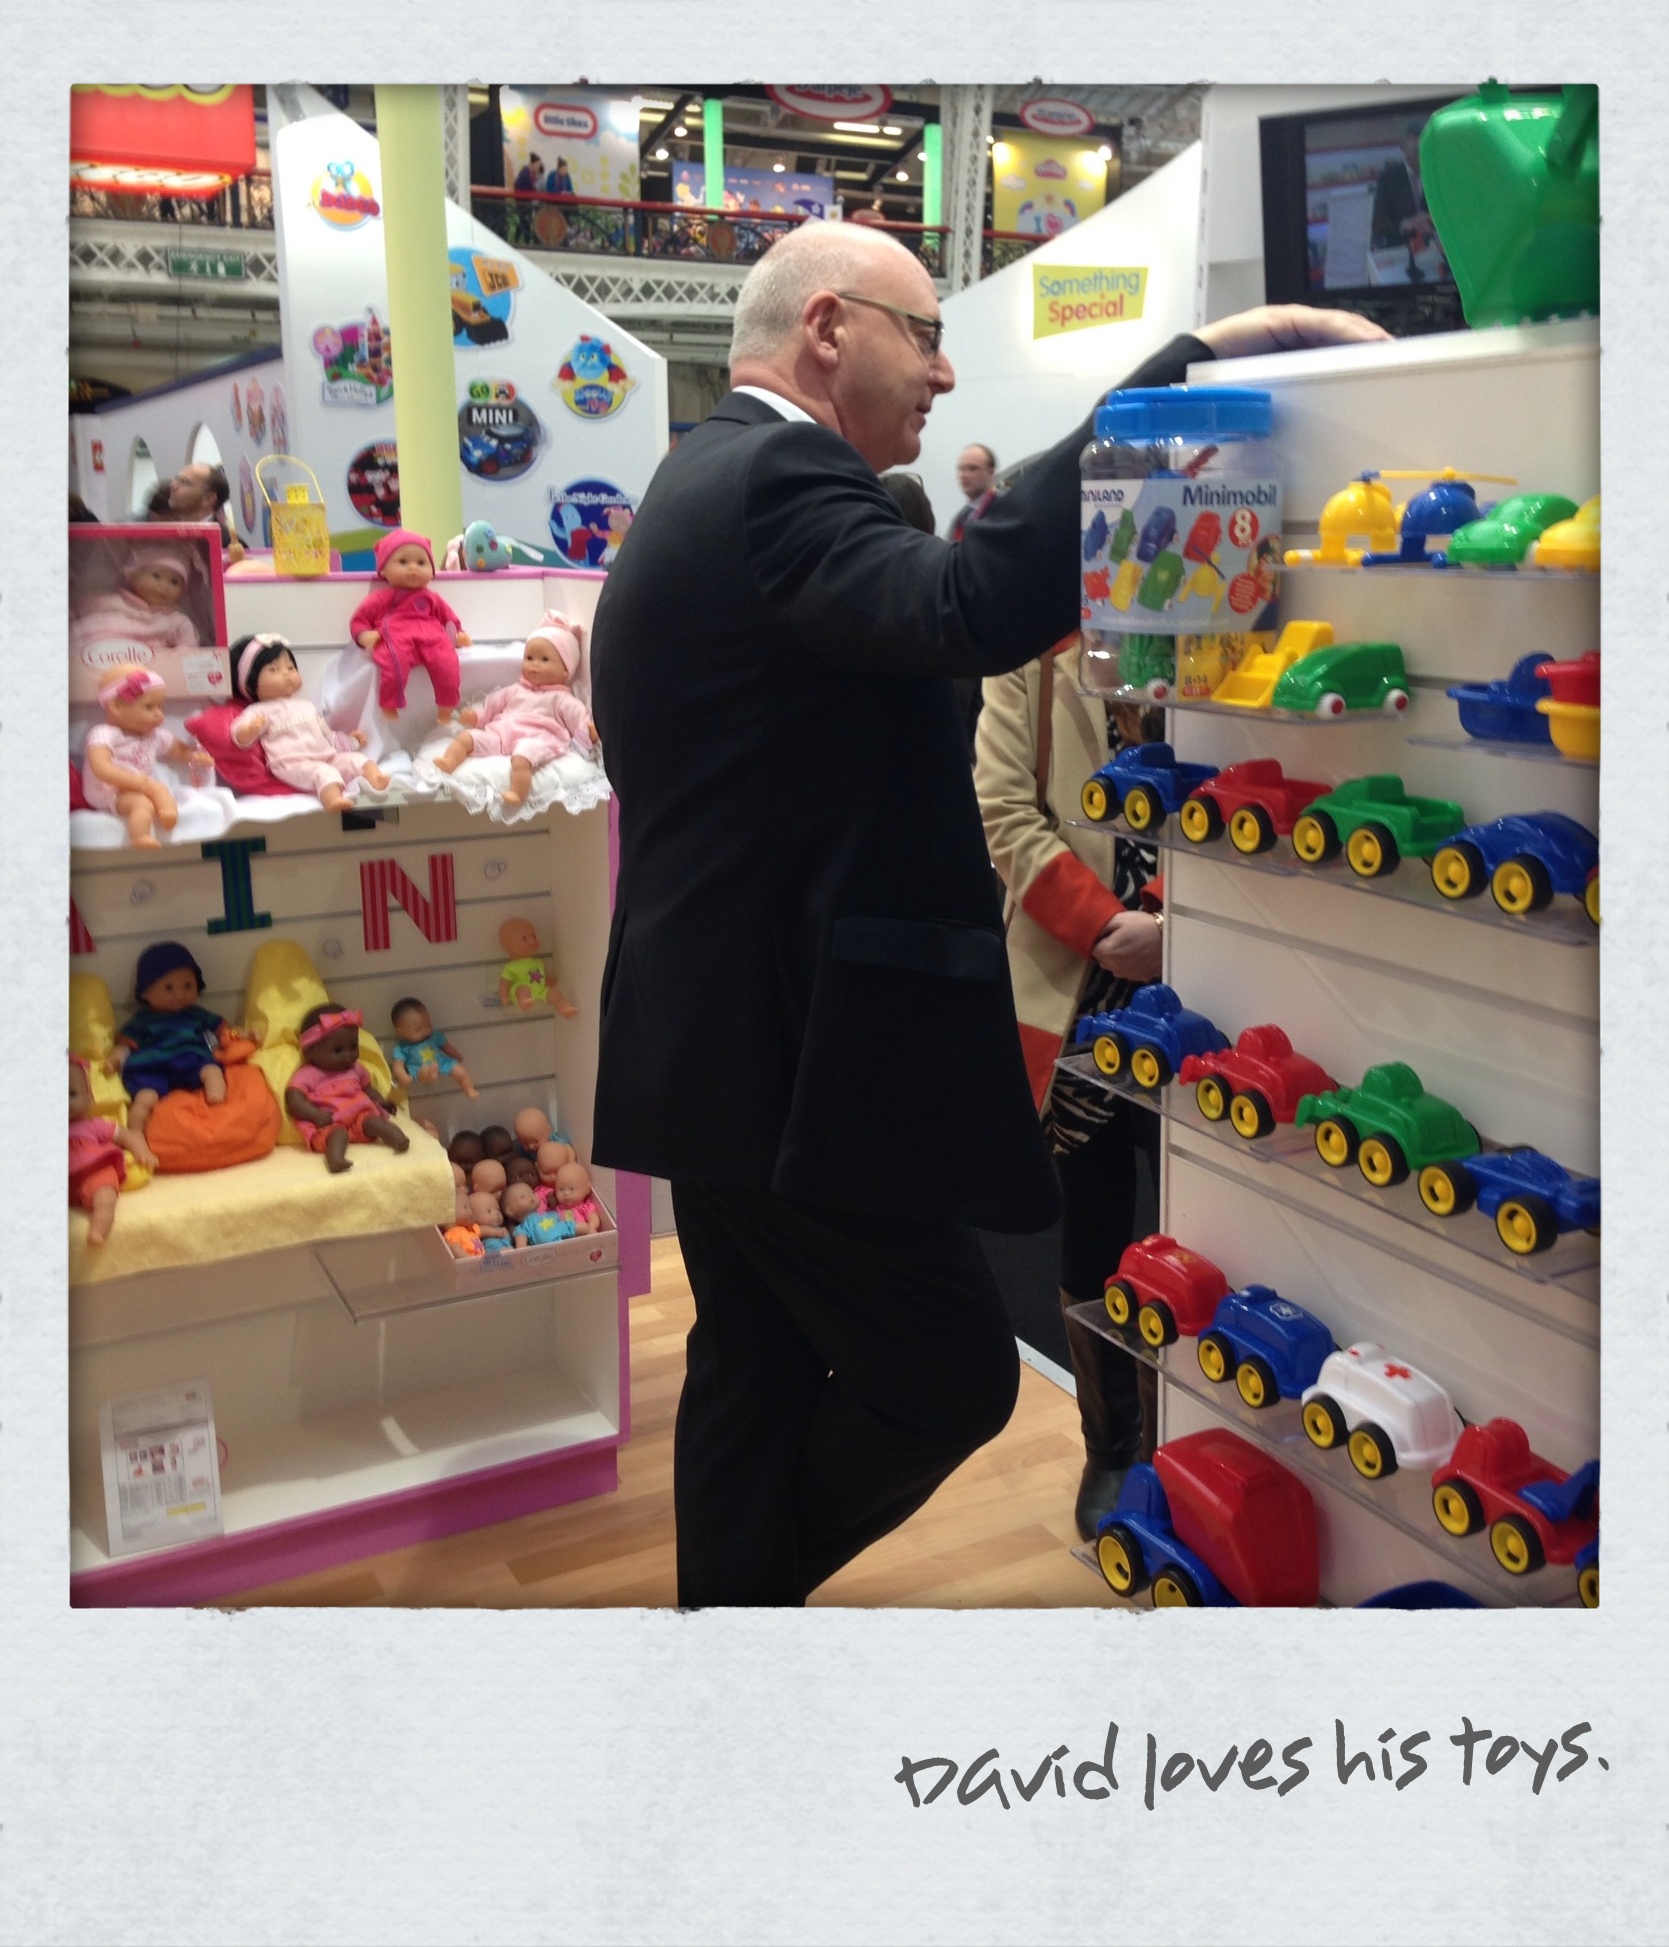 If you go down to the Toy Fair to play….